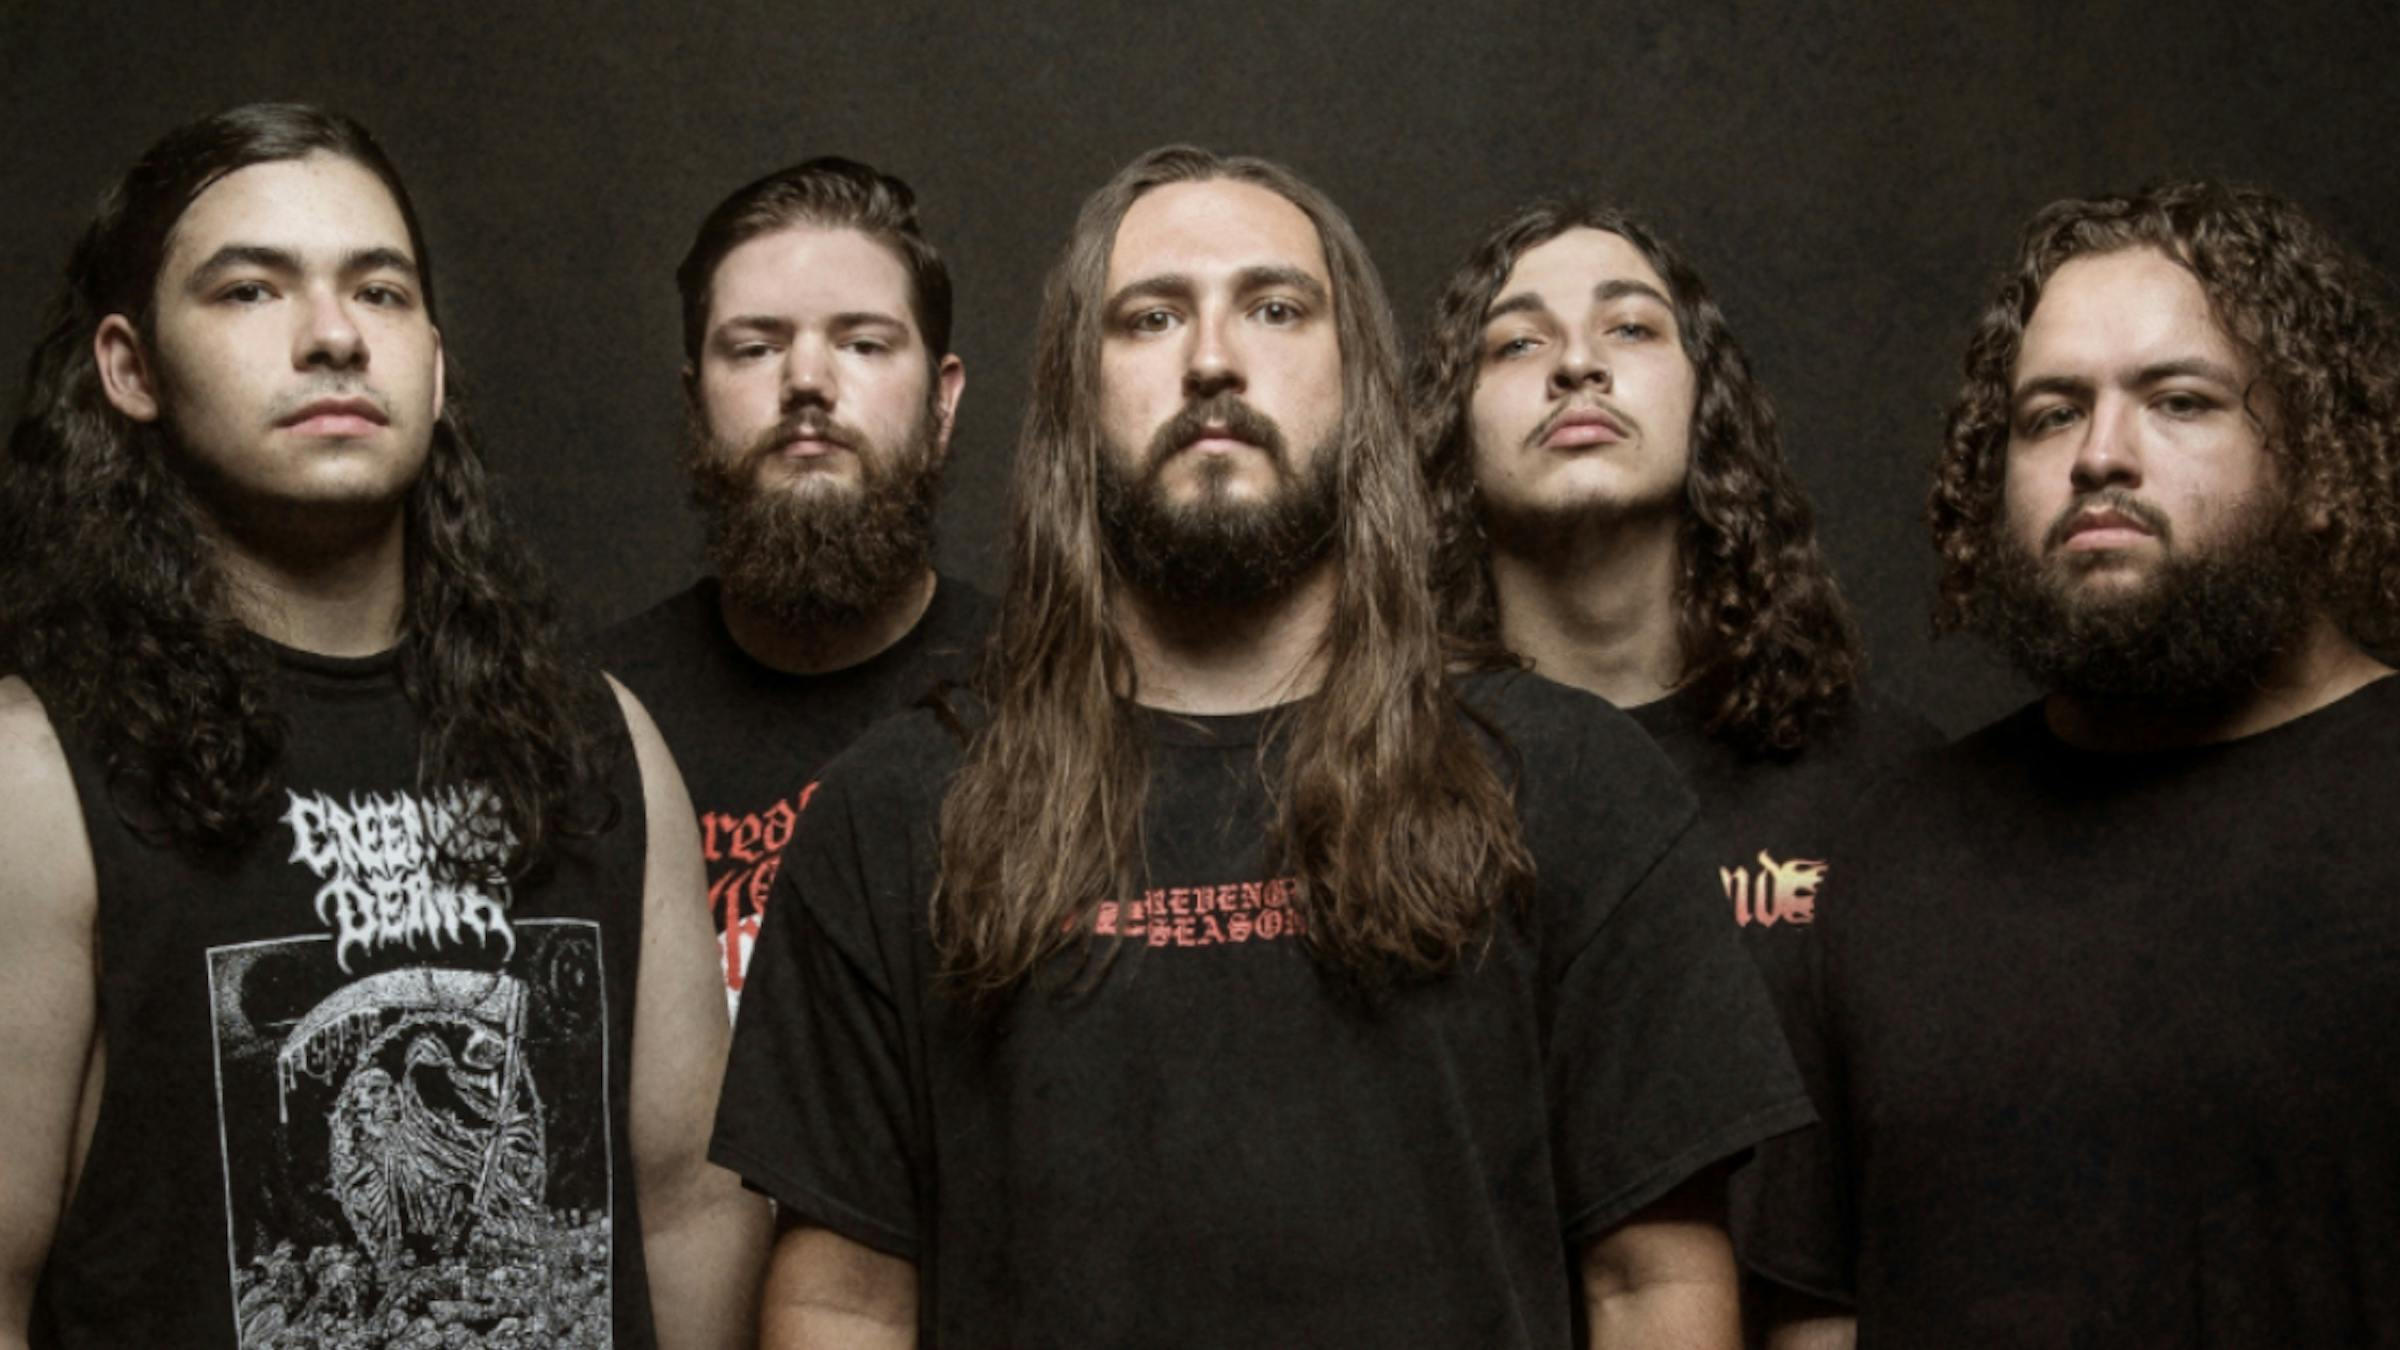 EXCLUSIVE: I Am Premiere Their Video For New Texas Death Metal Track, Burn Slow